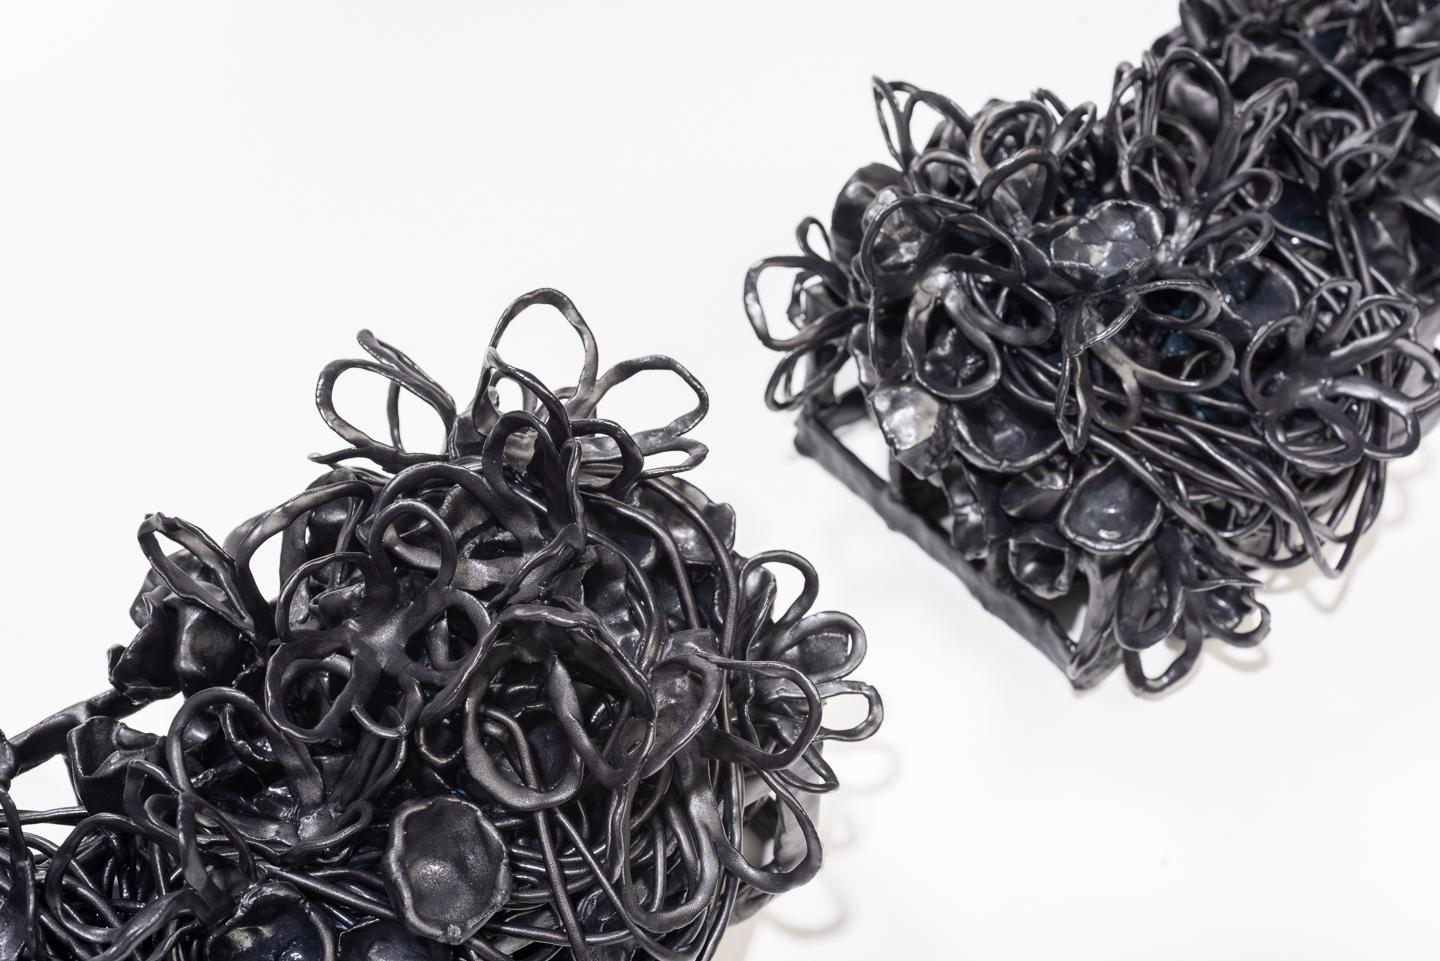 Joanna Poag Binding Time(Black Grid w/ Flowers and Pods) Ceramic Sculpture, 2019 In Excellent Condition For Sale In New York, NY